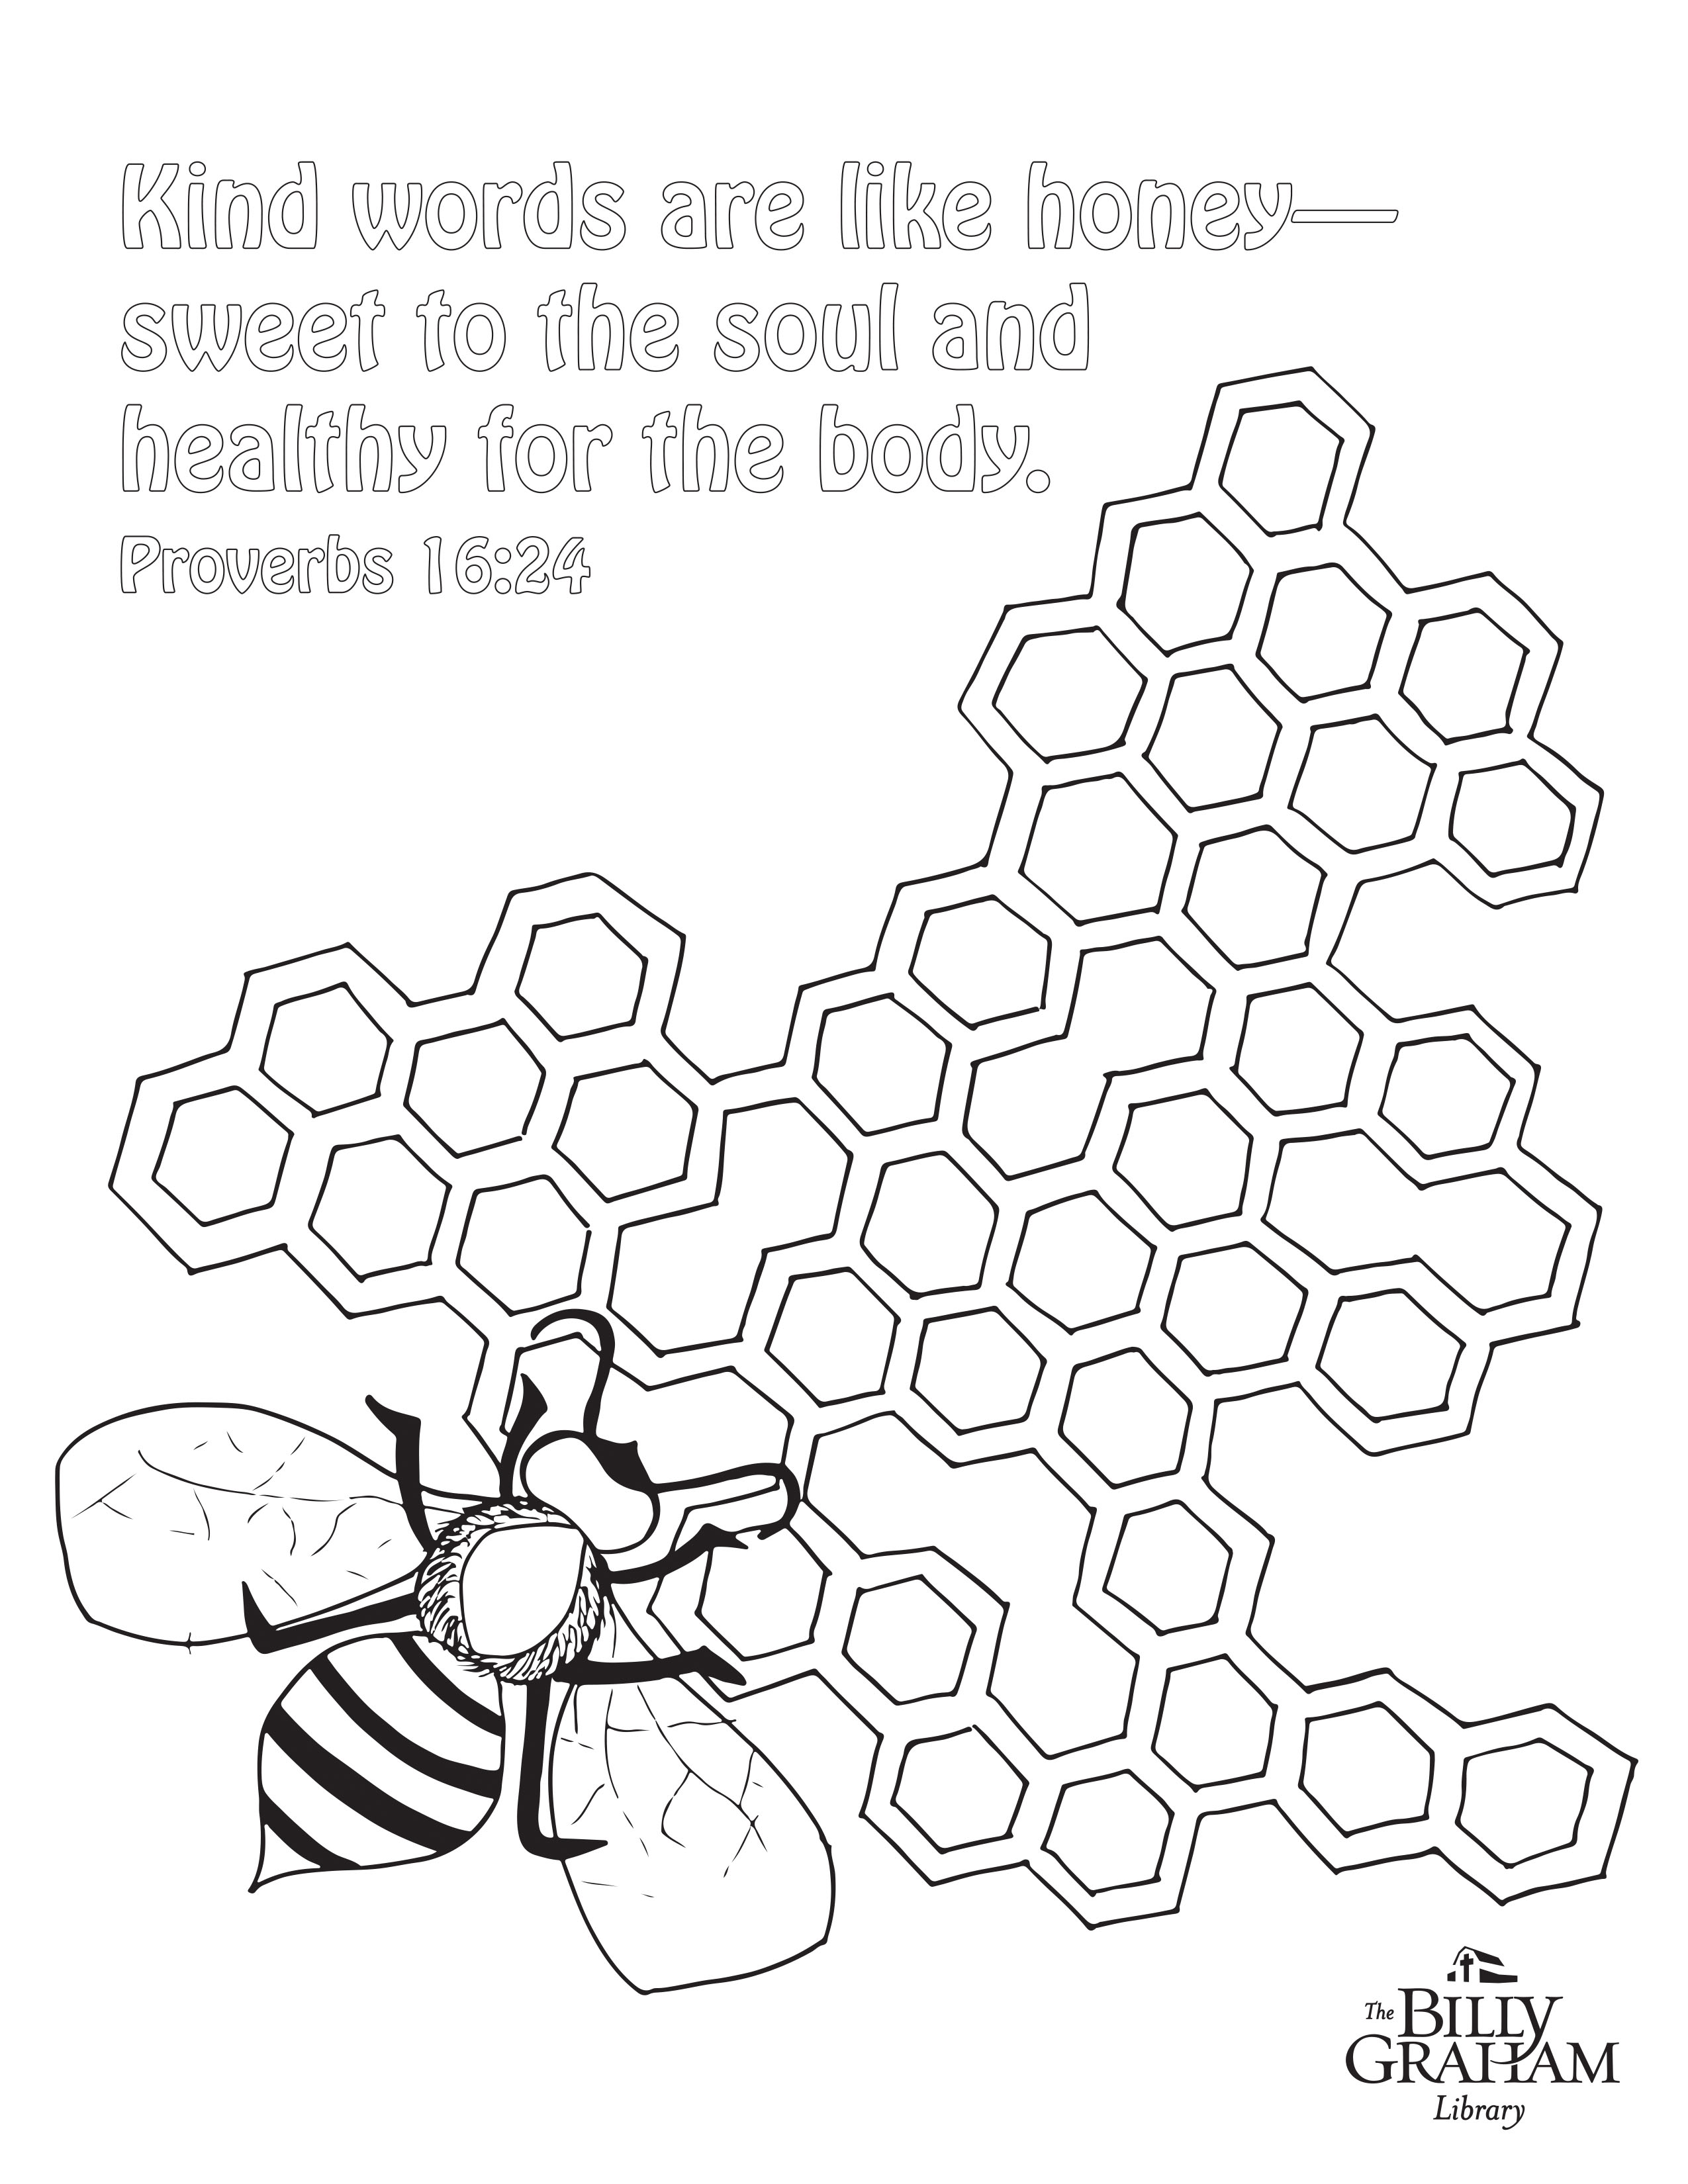 Summer Coloring Sheet Download   The Billy Graham Library Blog